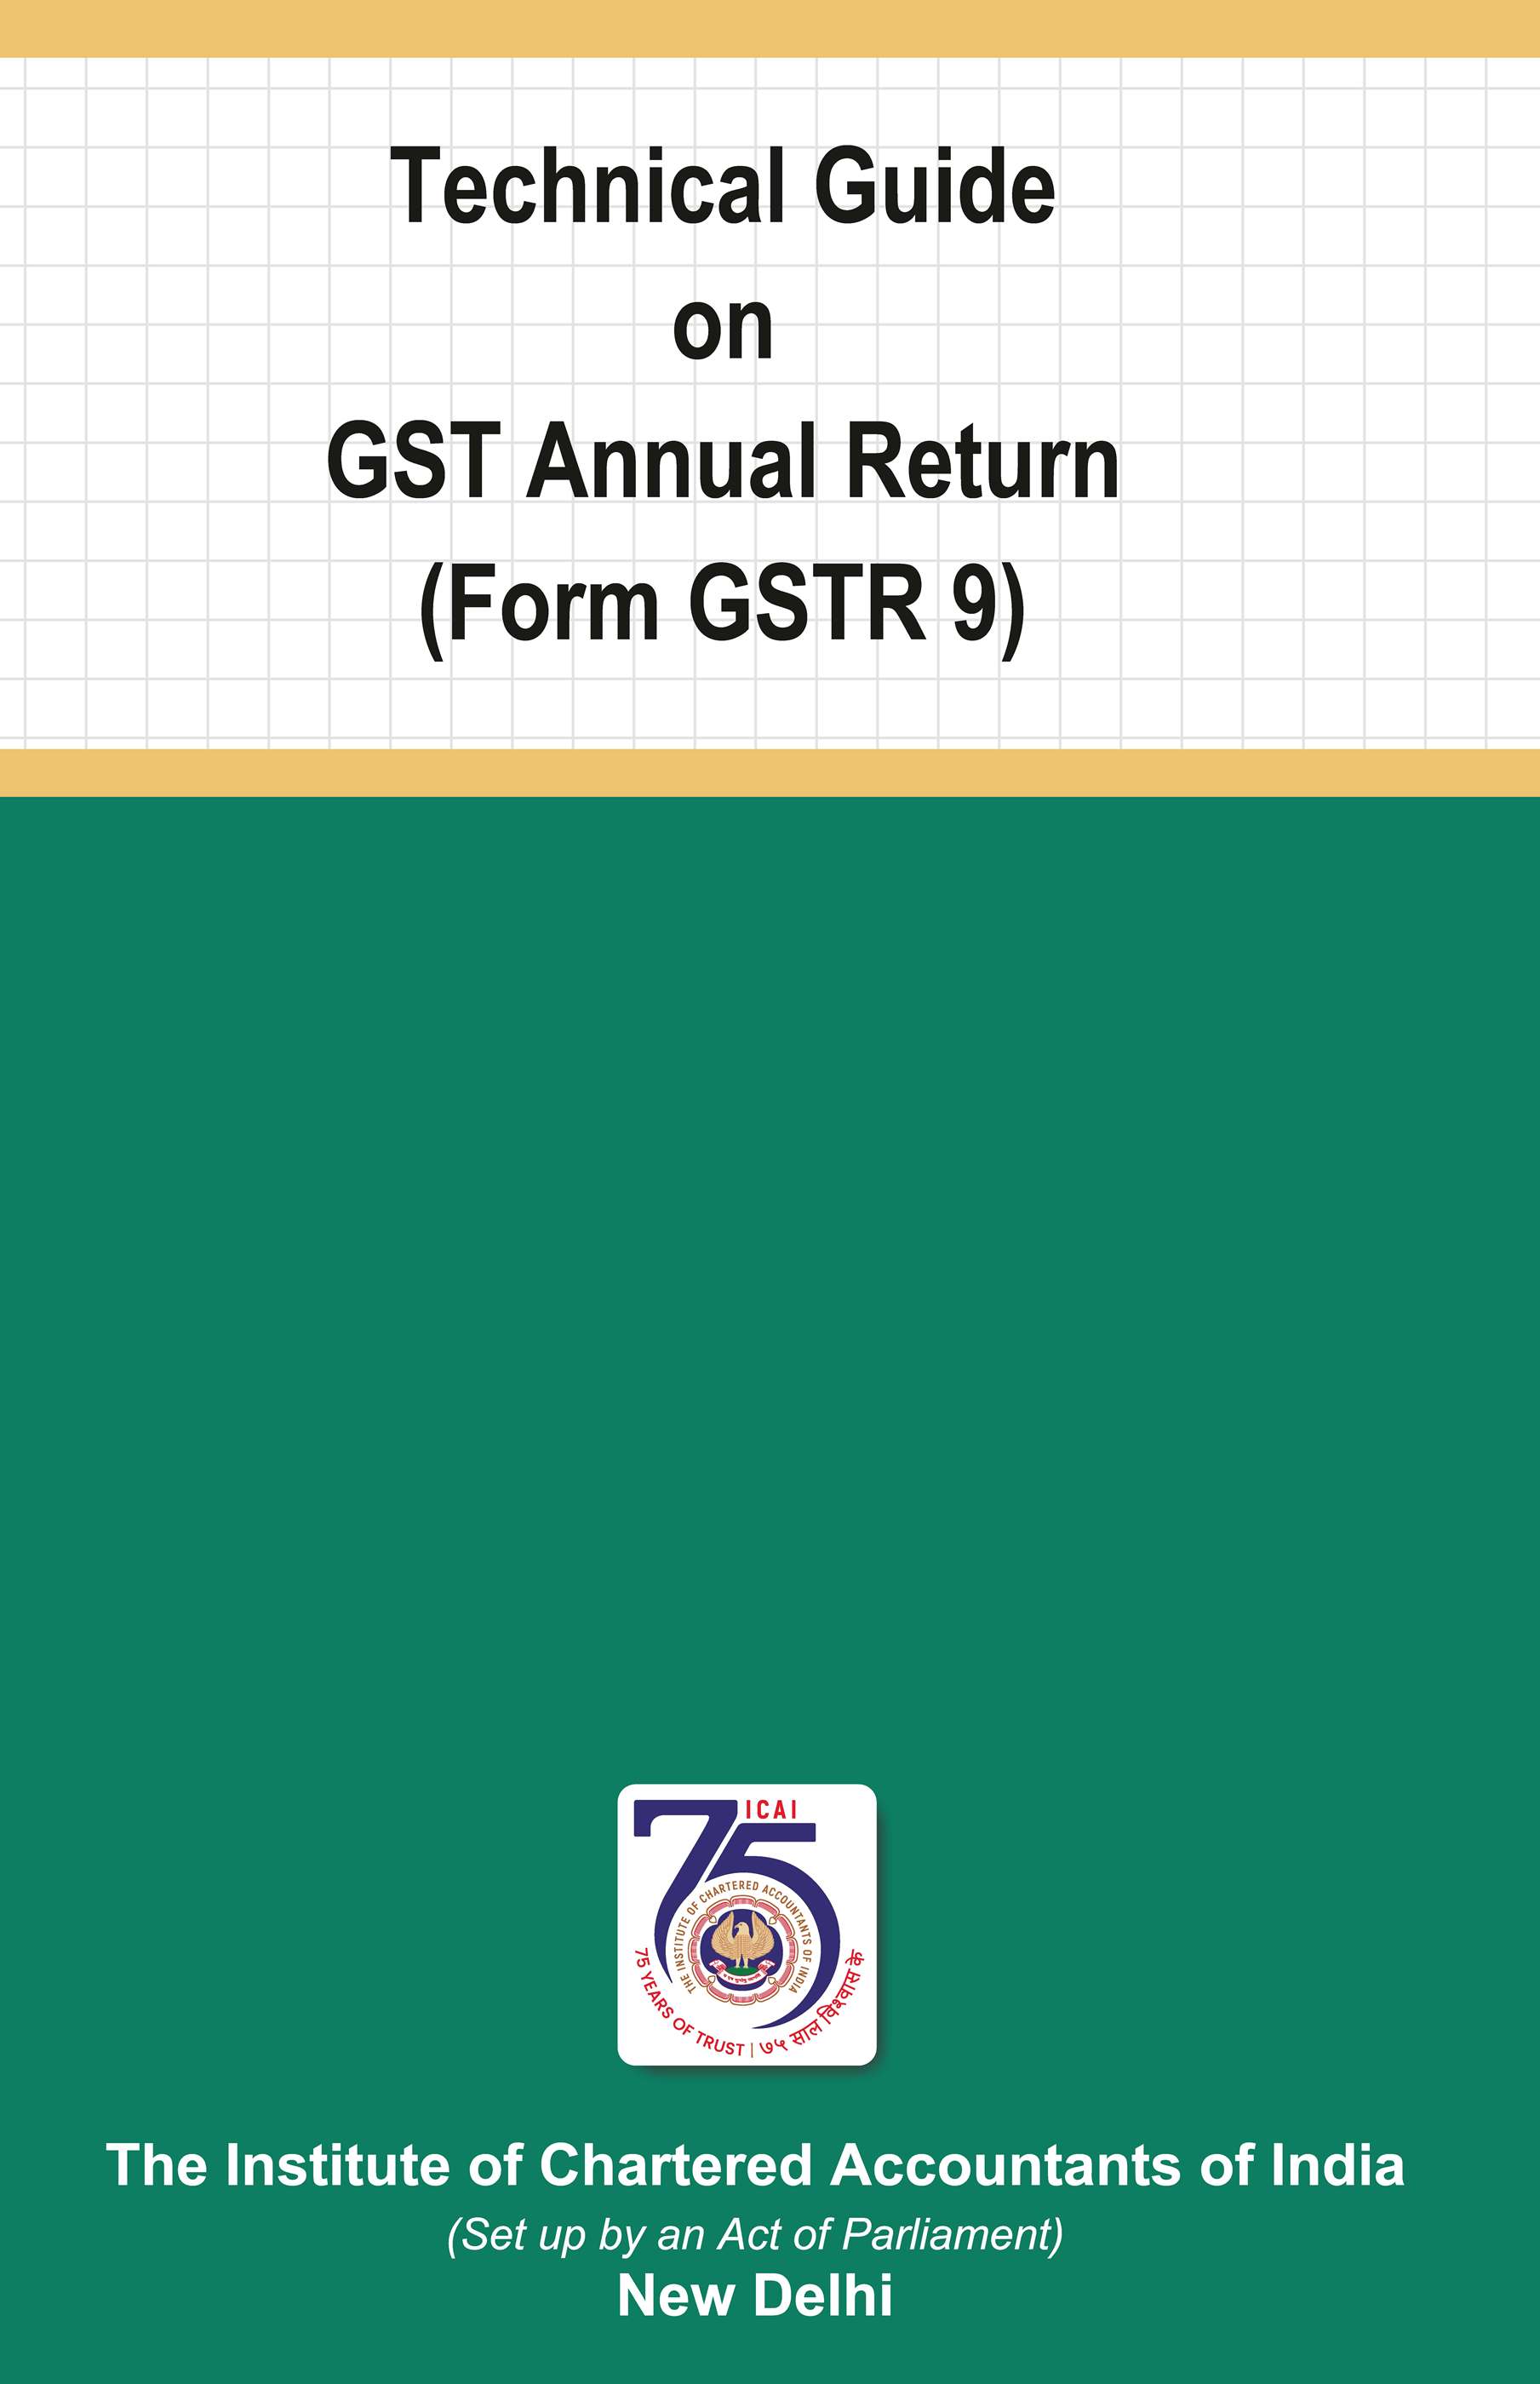 Technical Guide on GST Annual Return (Form GSTR 9) - 2nd Edition - October, 2023